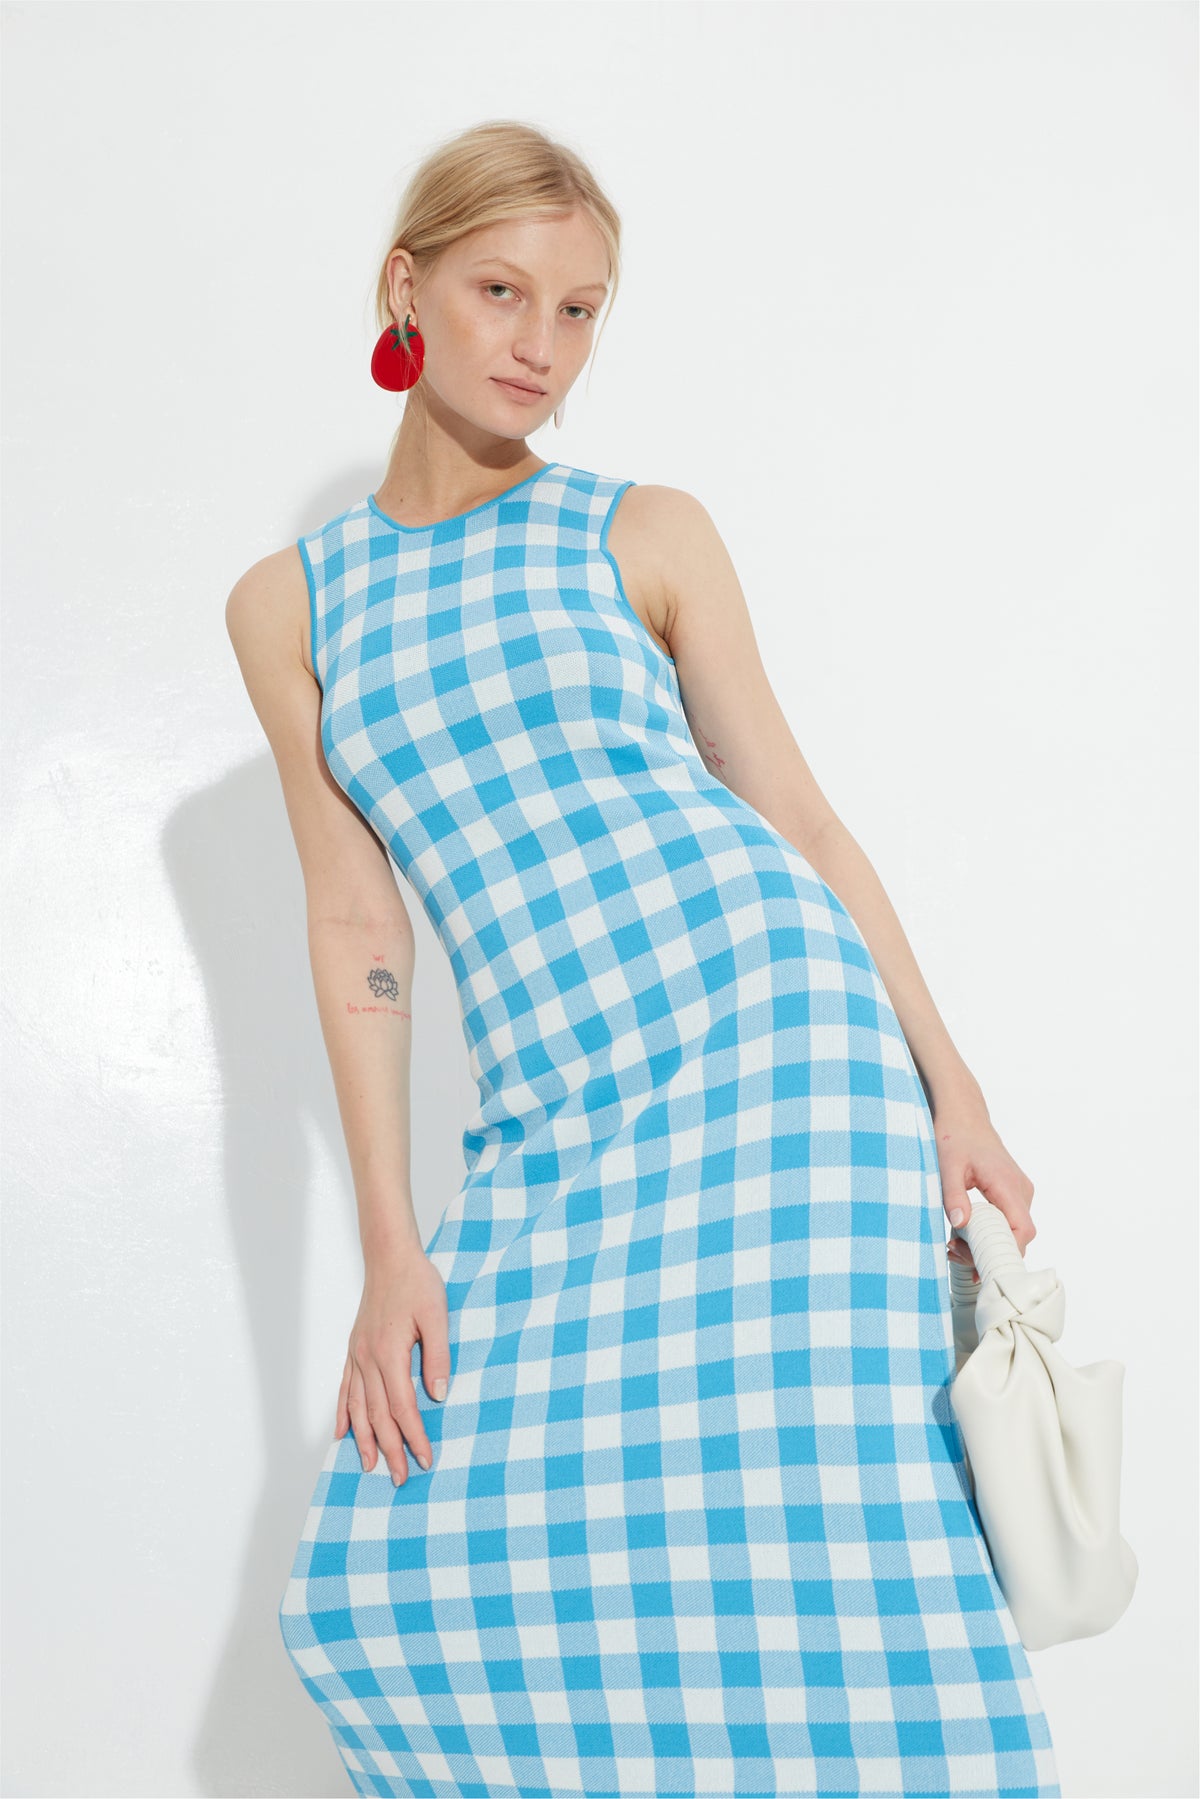 Knits By Axon Sleeveless Dress in Light Blue Gingham